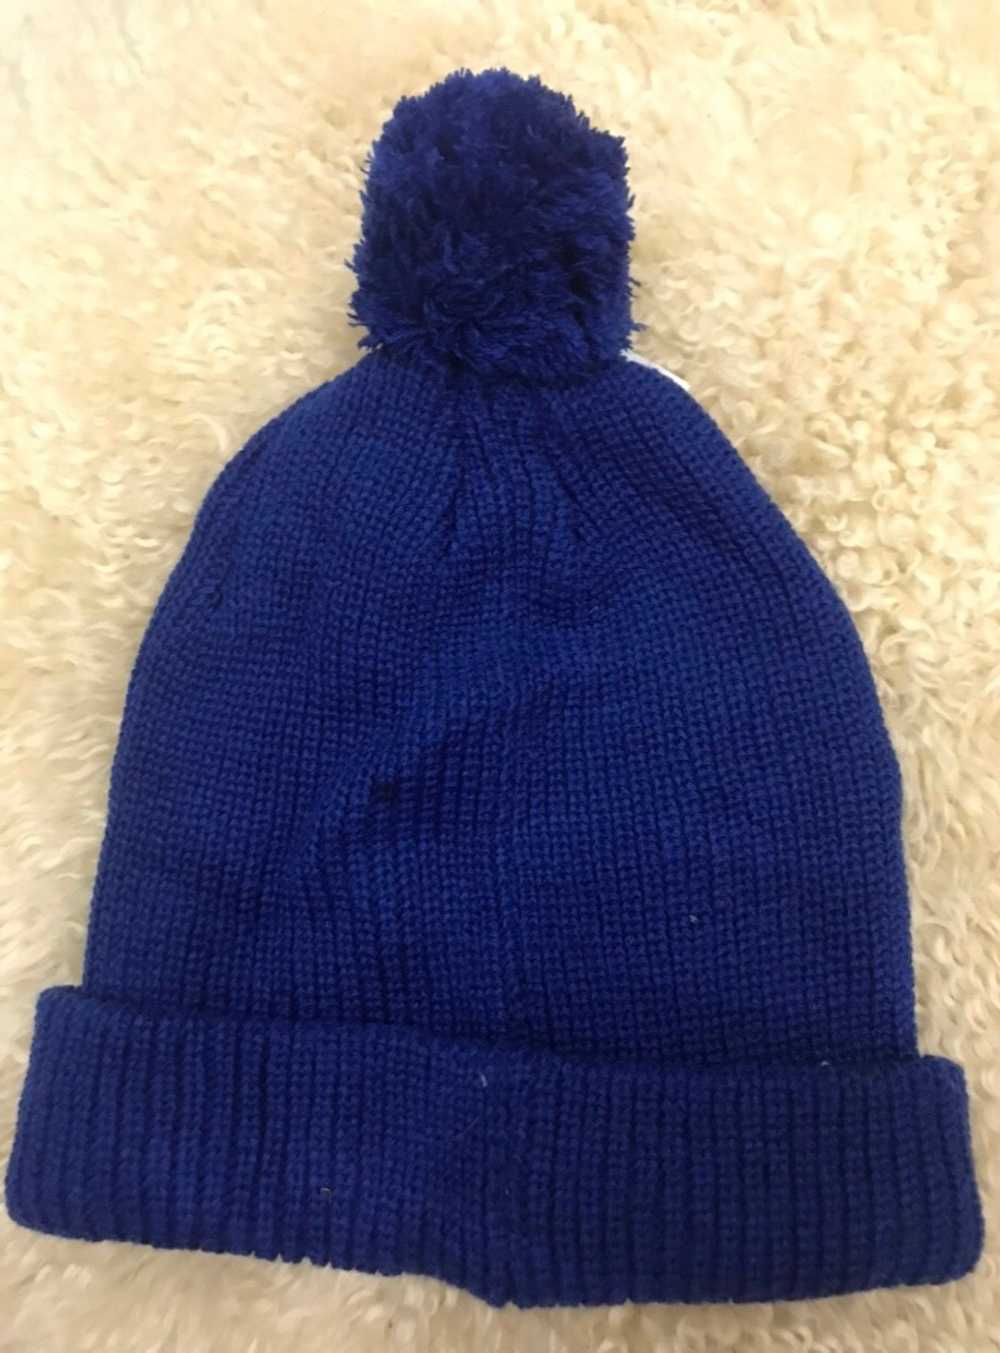 Vintage - Olympic 2018 Pyeong Chang Beanie Hat - image 5